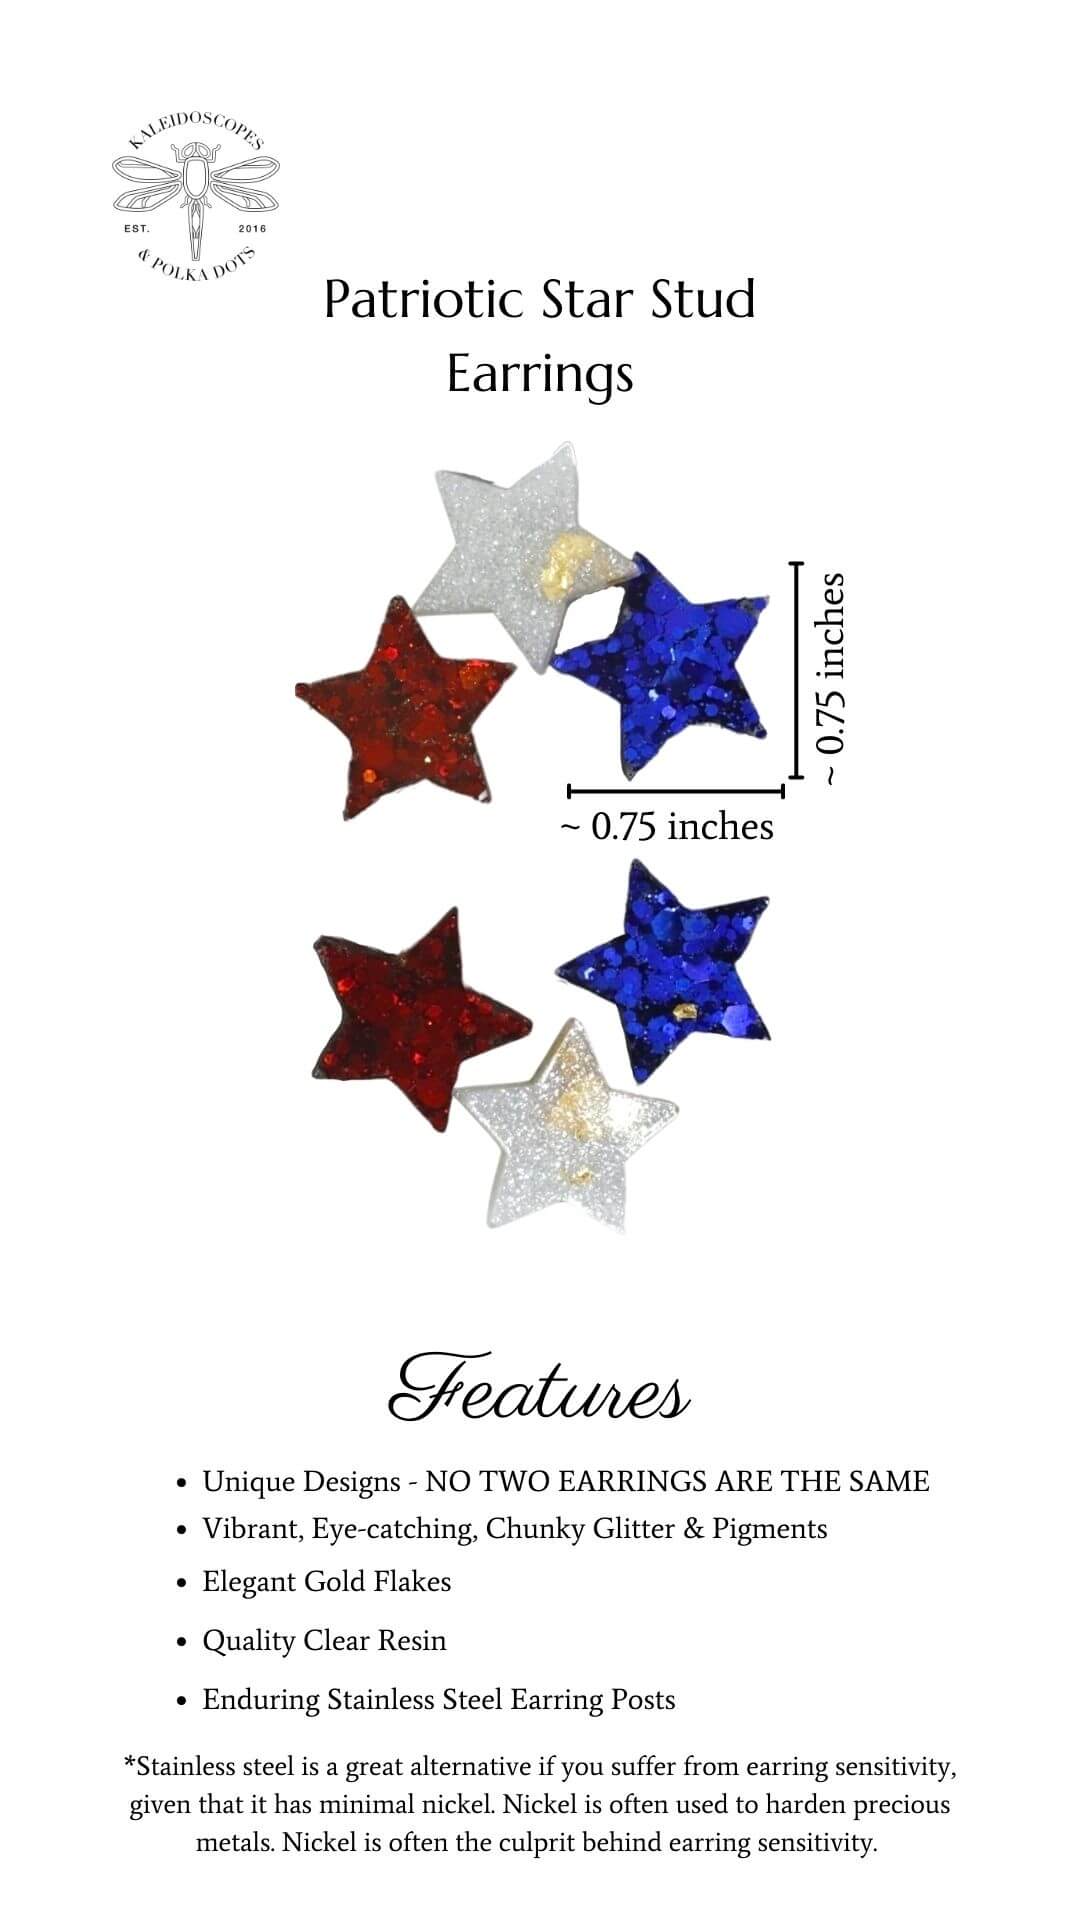 patriotic-star-stud-earrings---patriotic-jewelry---red-white-and-blue-glittery-earrings---kaleidoscopes-and-polka-dots